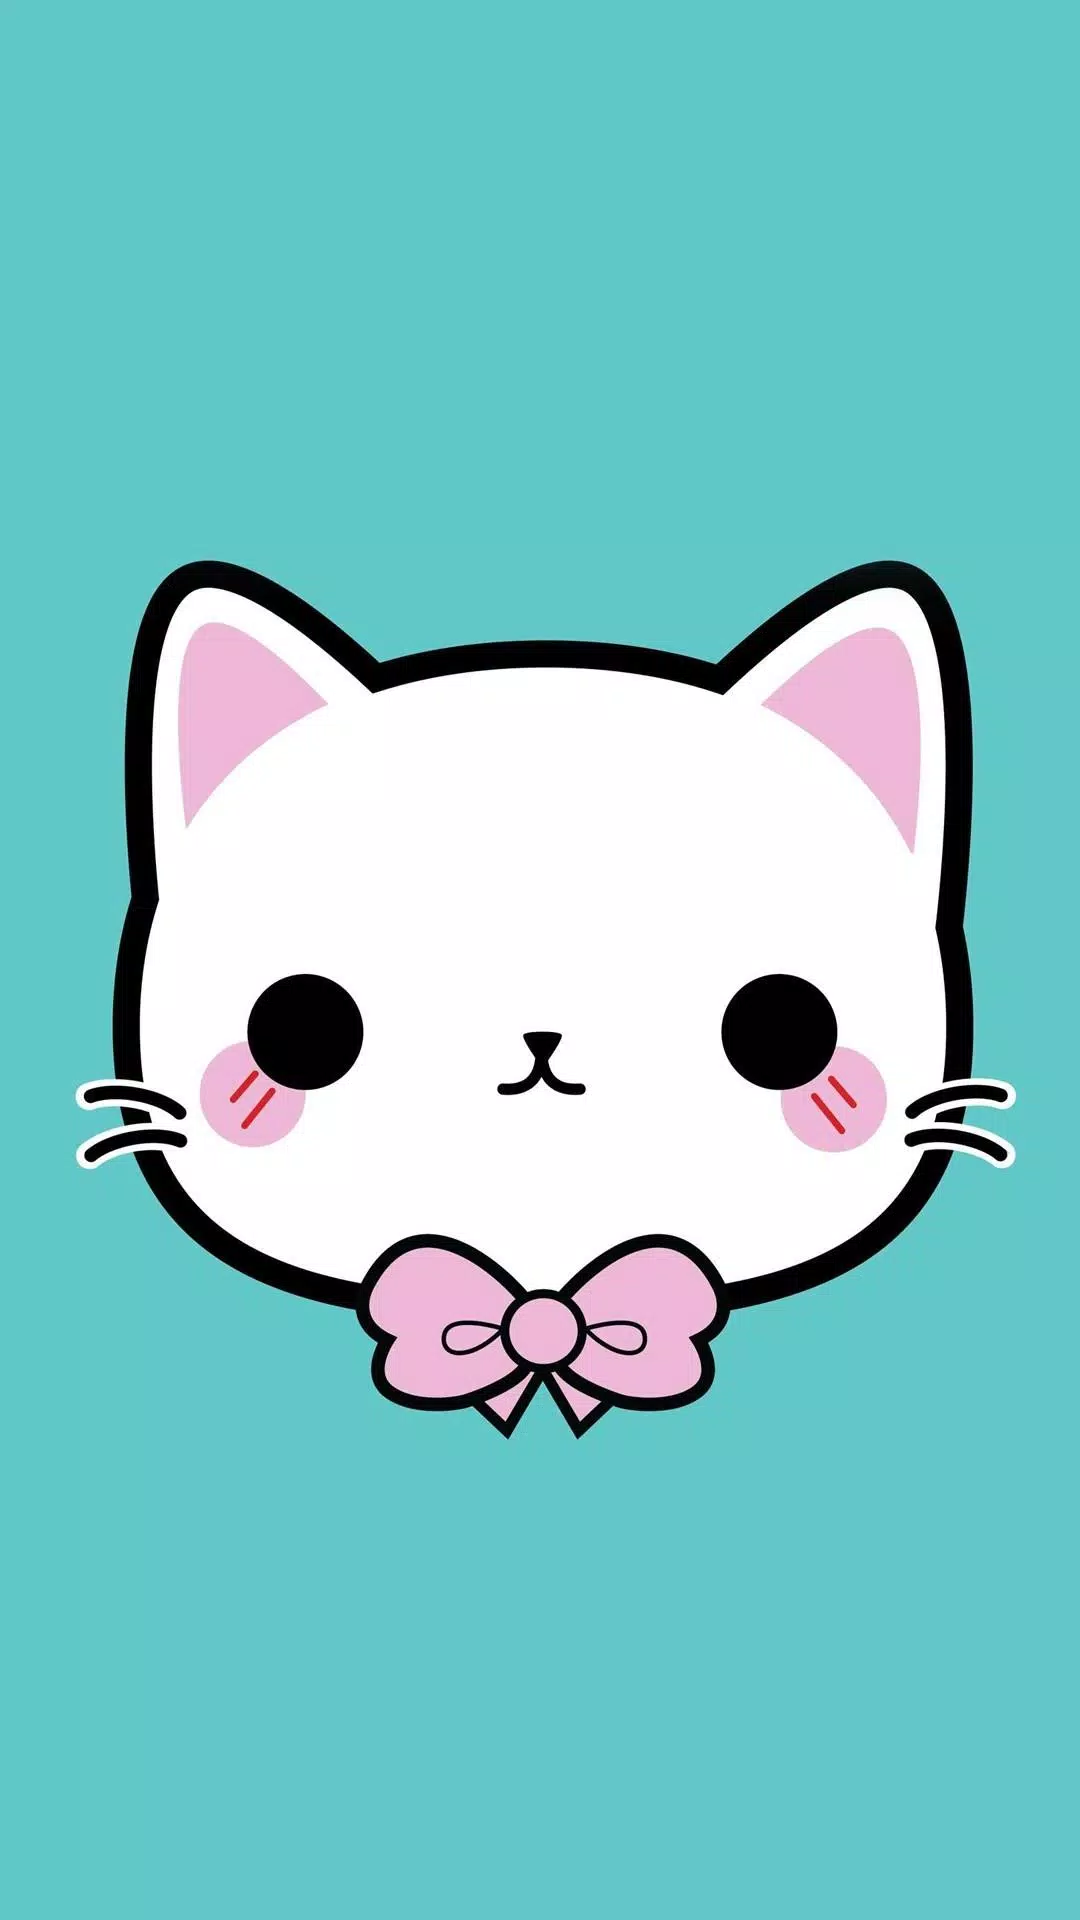 Kawaii Cute Wallpapers & Girly Backgrounds HD ❤️???? APK for ...